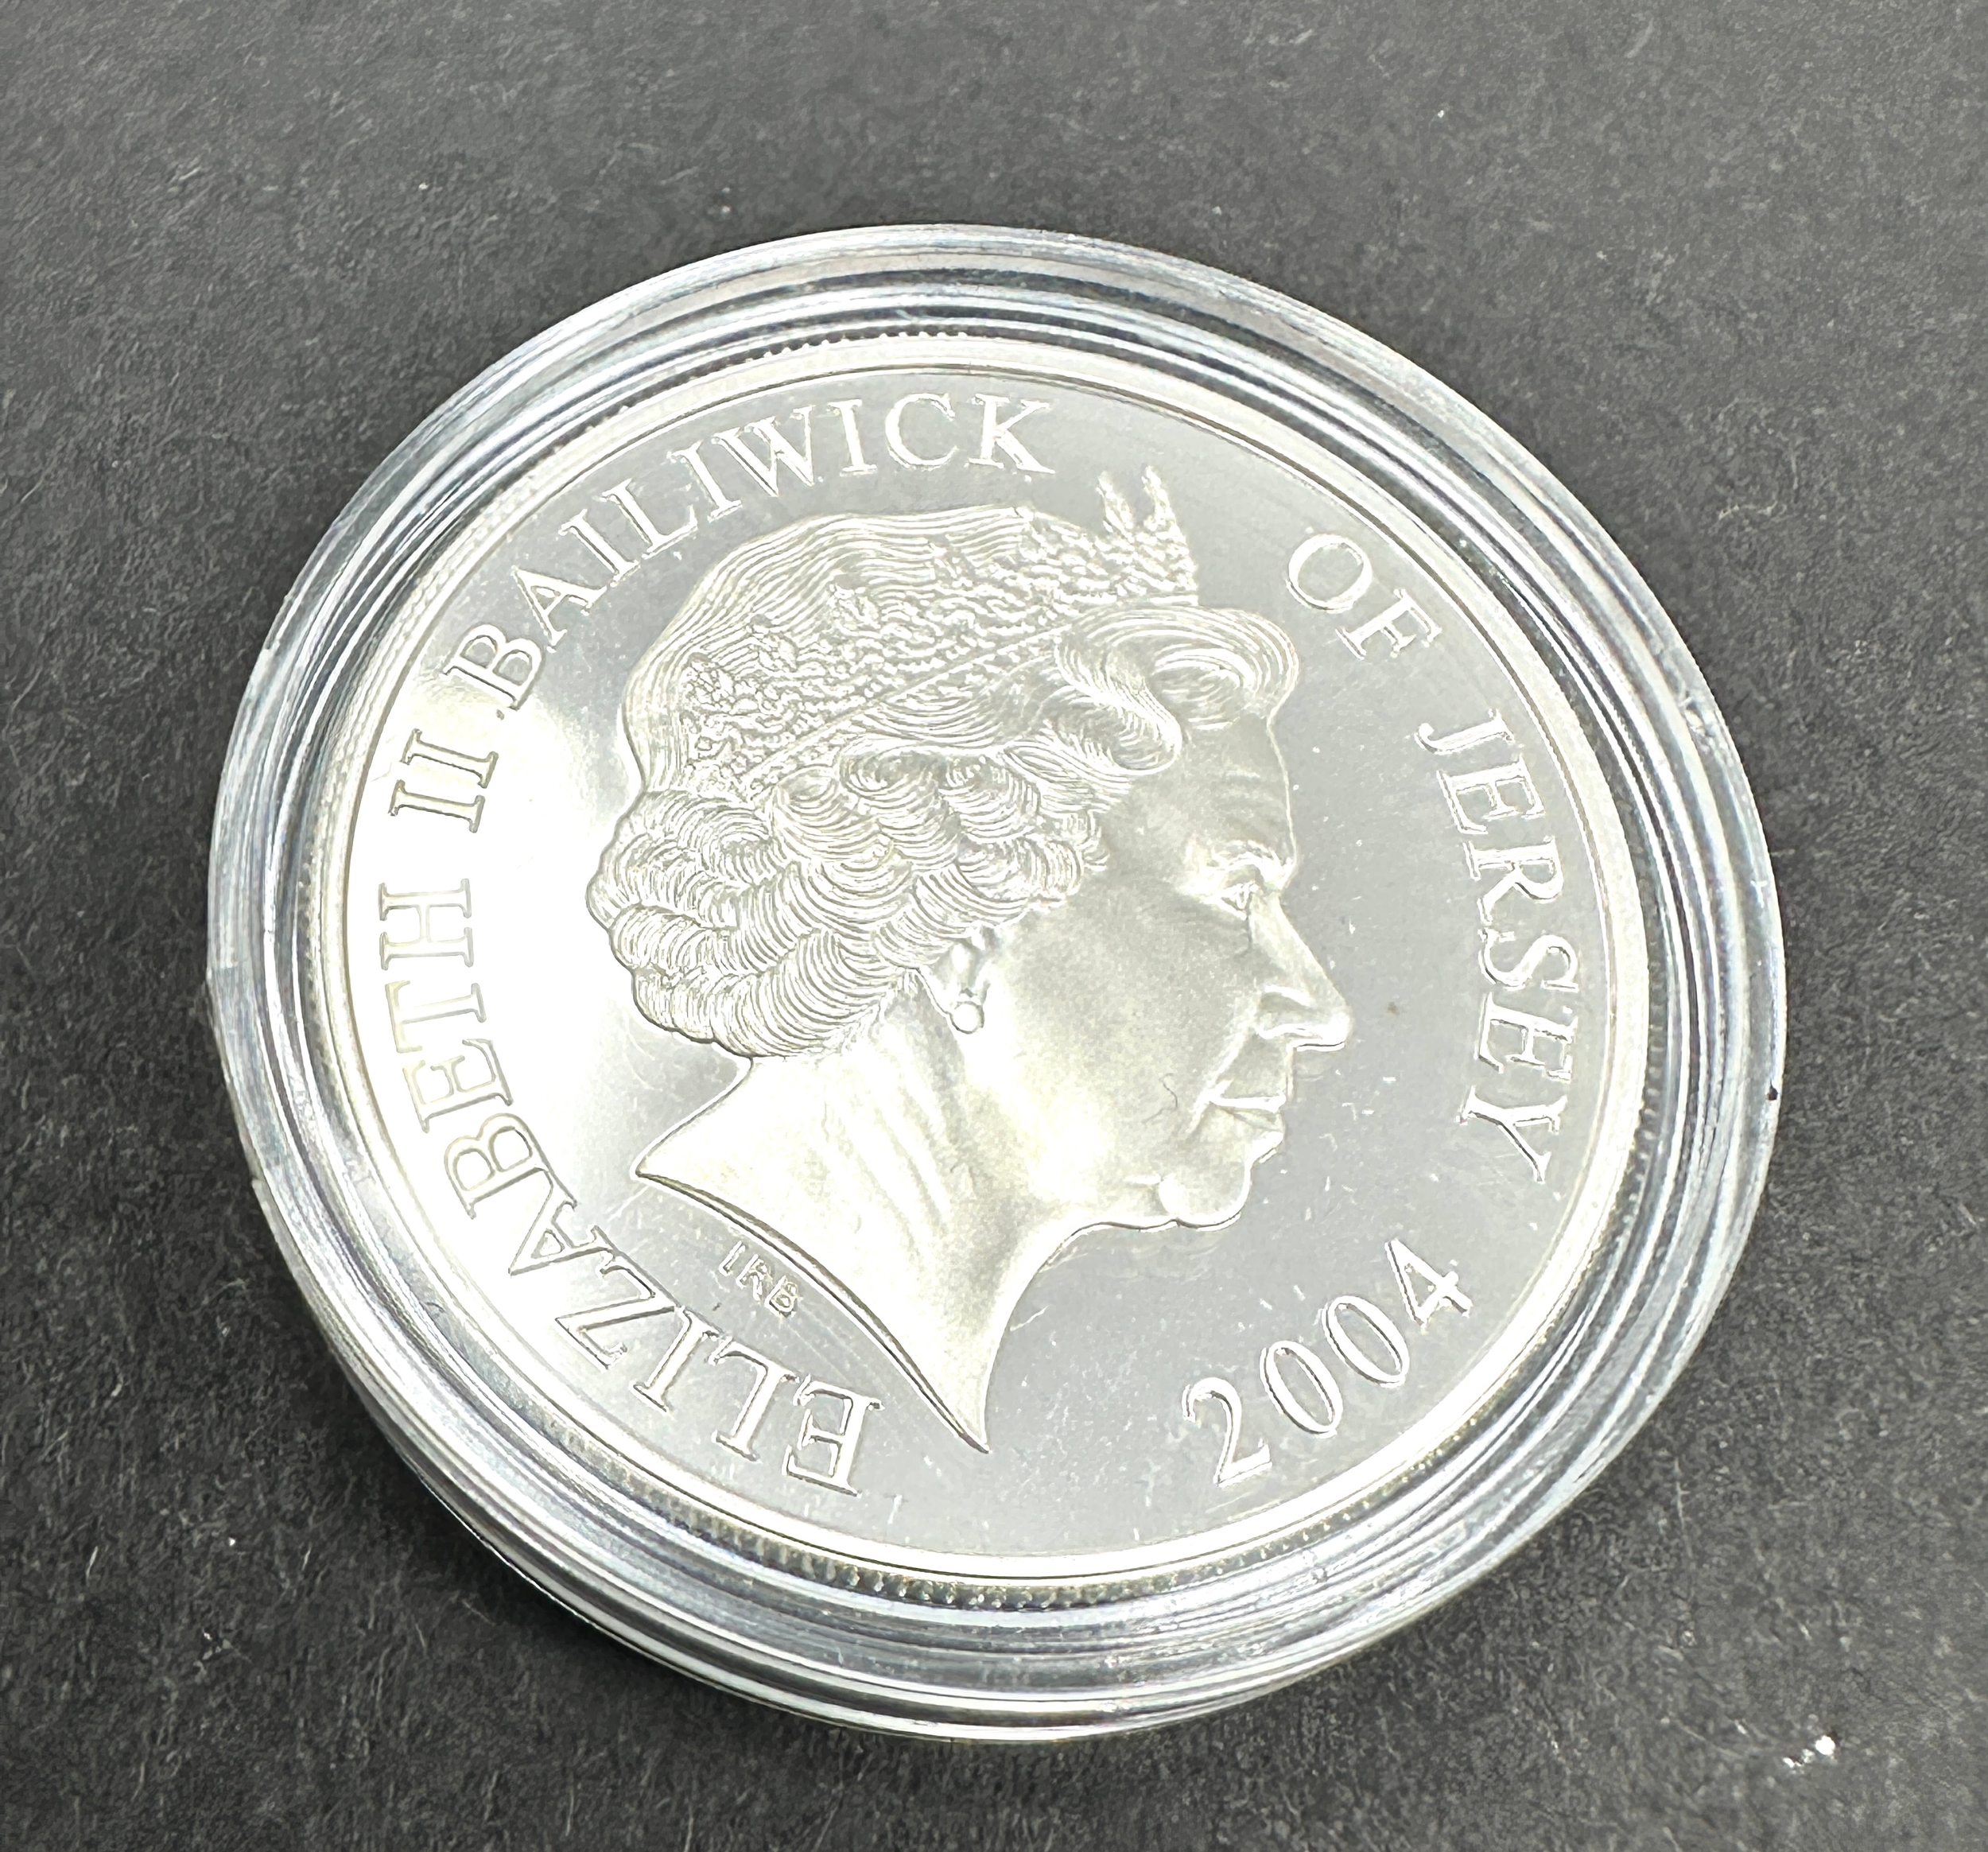 2004 silver £5 pound coin Encapsulated - Image 2 of 2